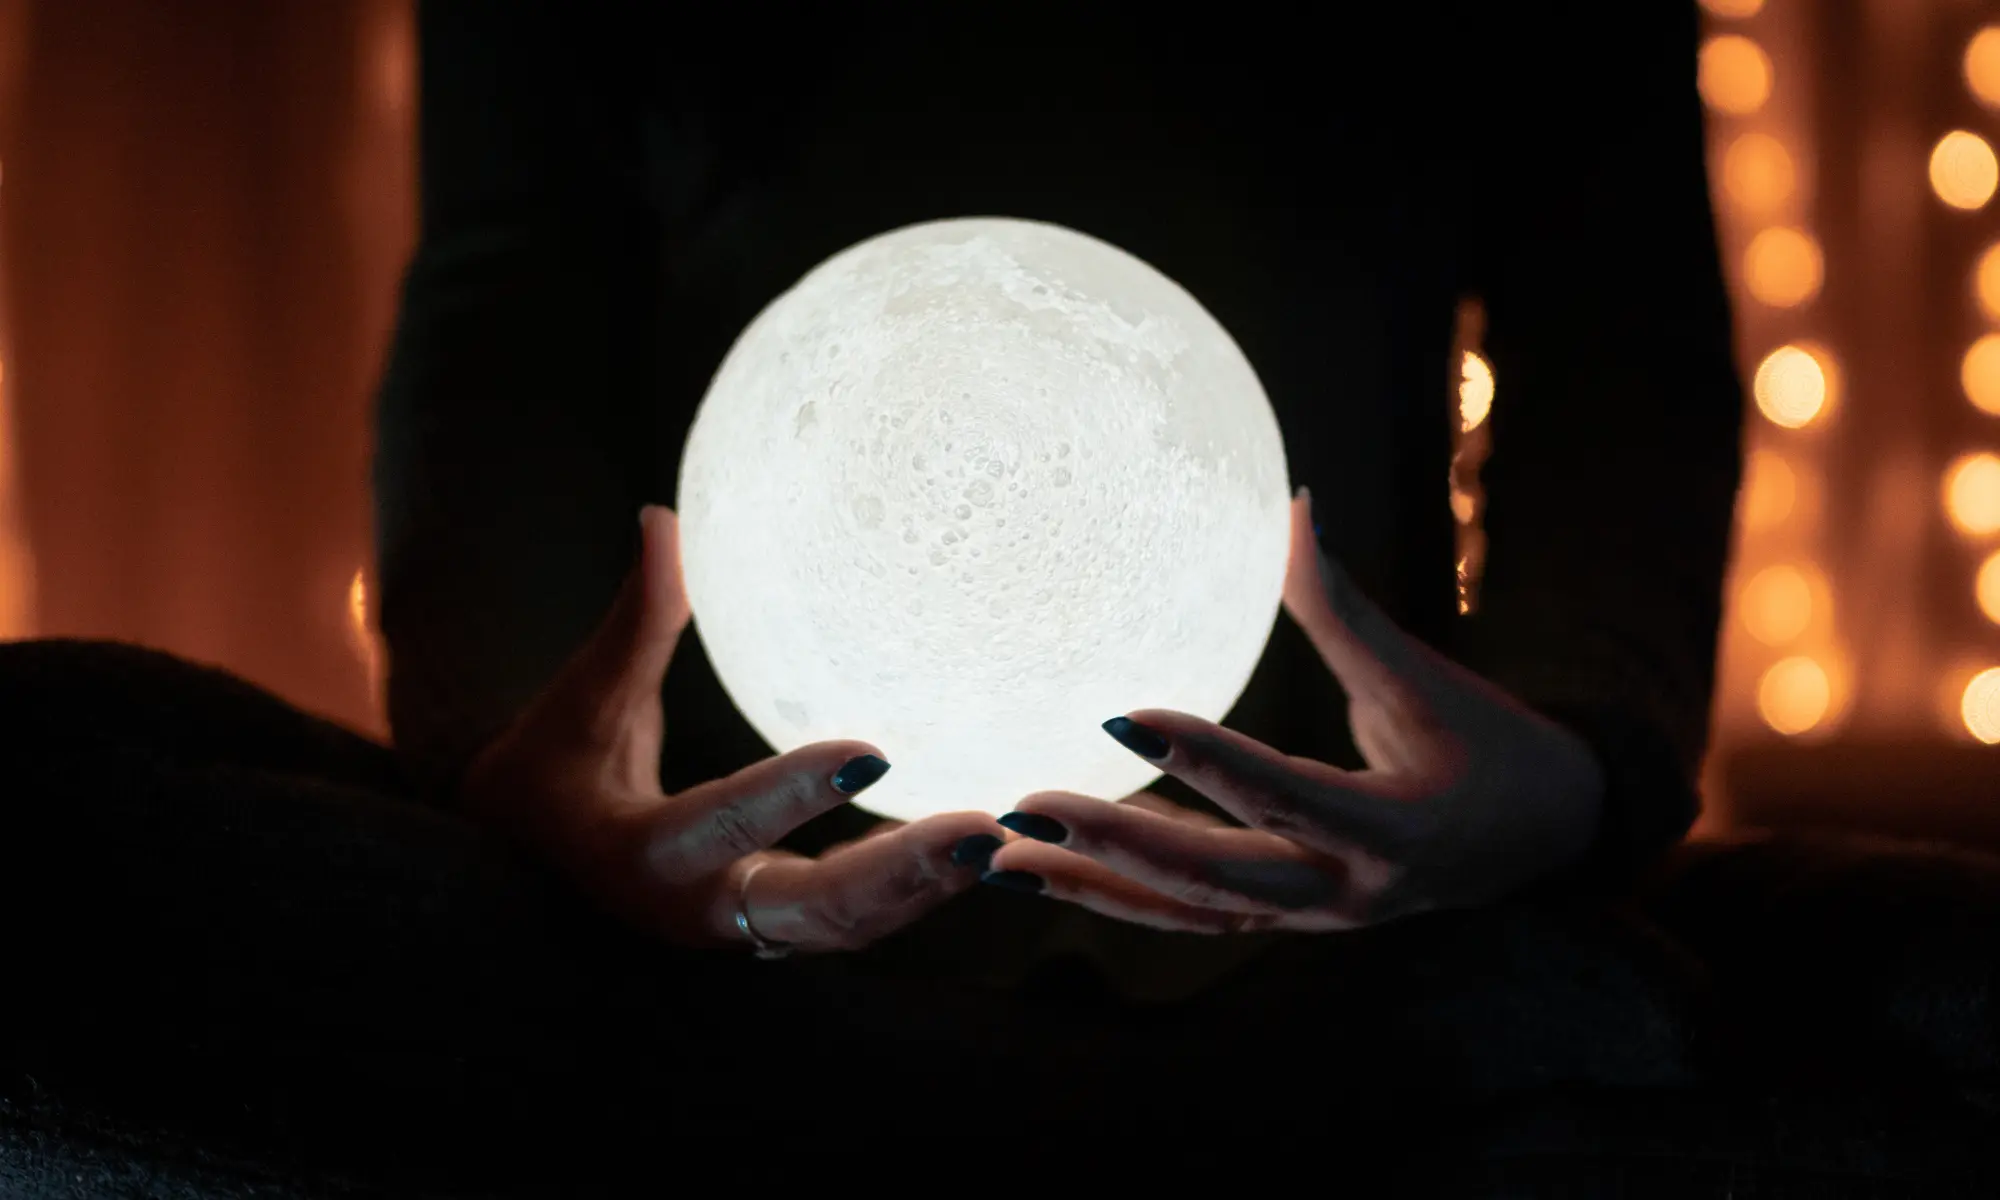 A person holding a glowing, moon-like orb.